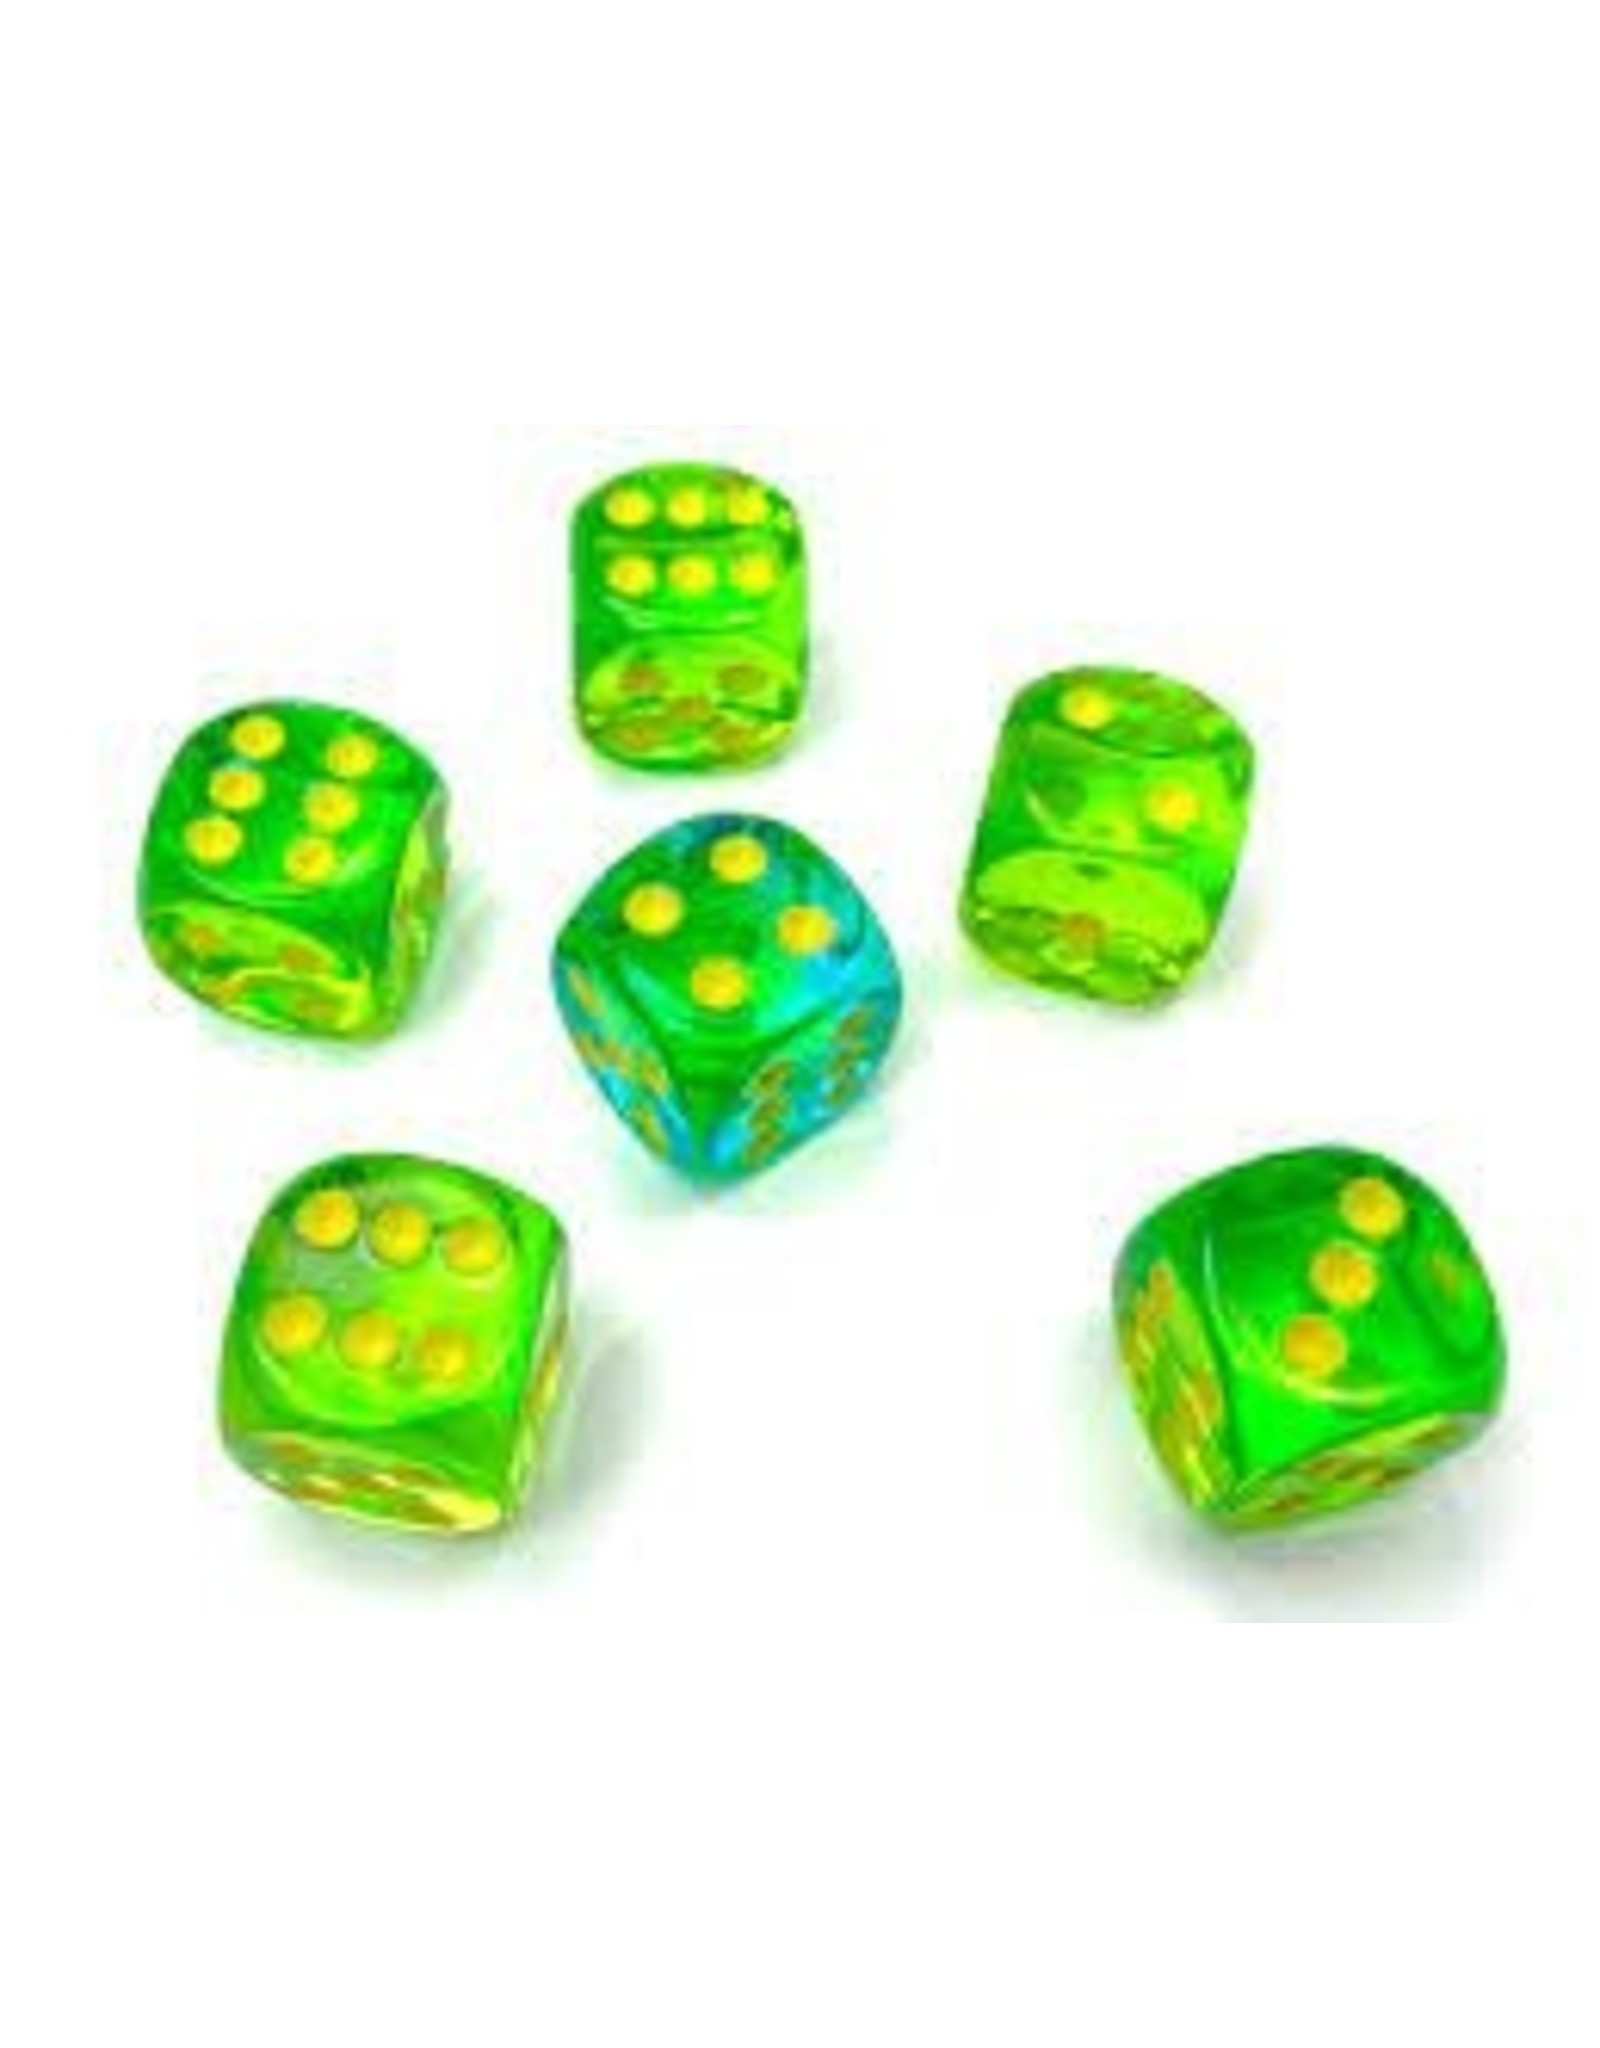 Chessex d6 Cube 16mm Gemini Translucent Green-Teal with yellow (12)